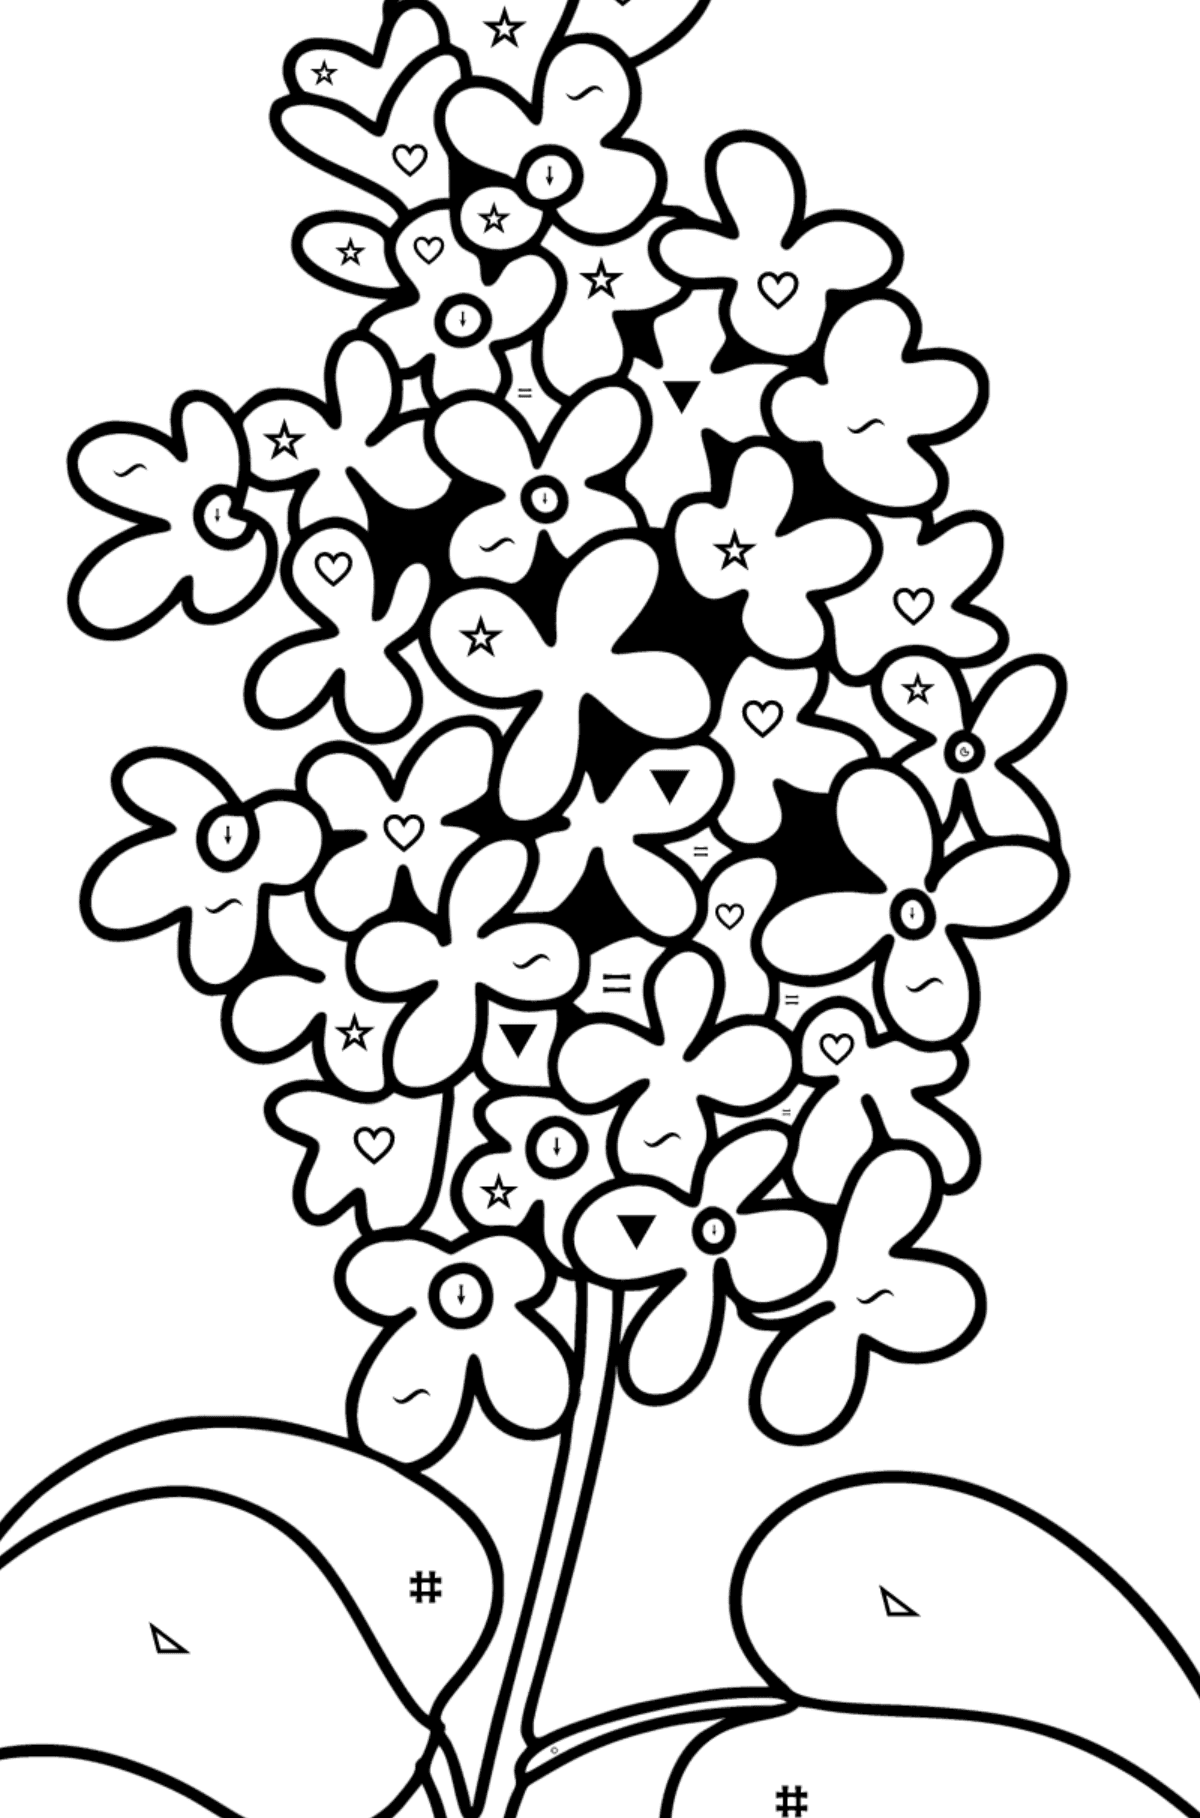 Lilac sprig coloring page - Coloring by Symbols and Geometric Shapes for Kids